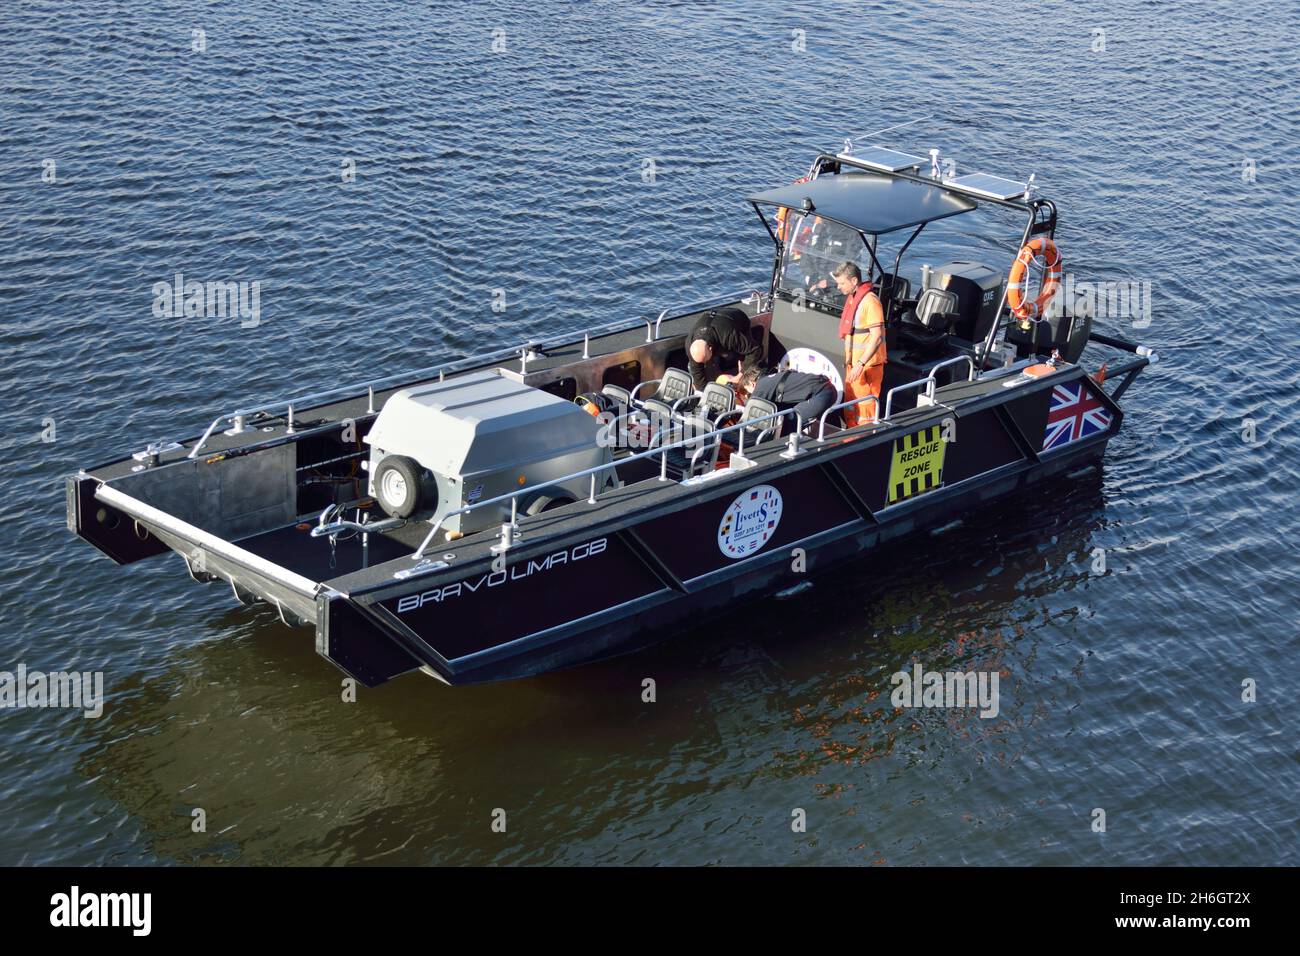 Landing Craft BRAVO LIMA GB operated by Livetts Group seen operating in London Stock Photo